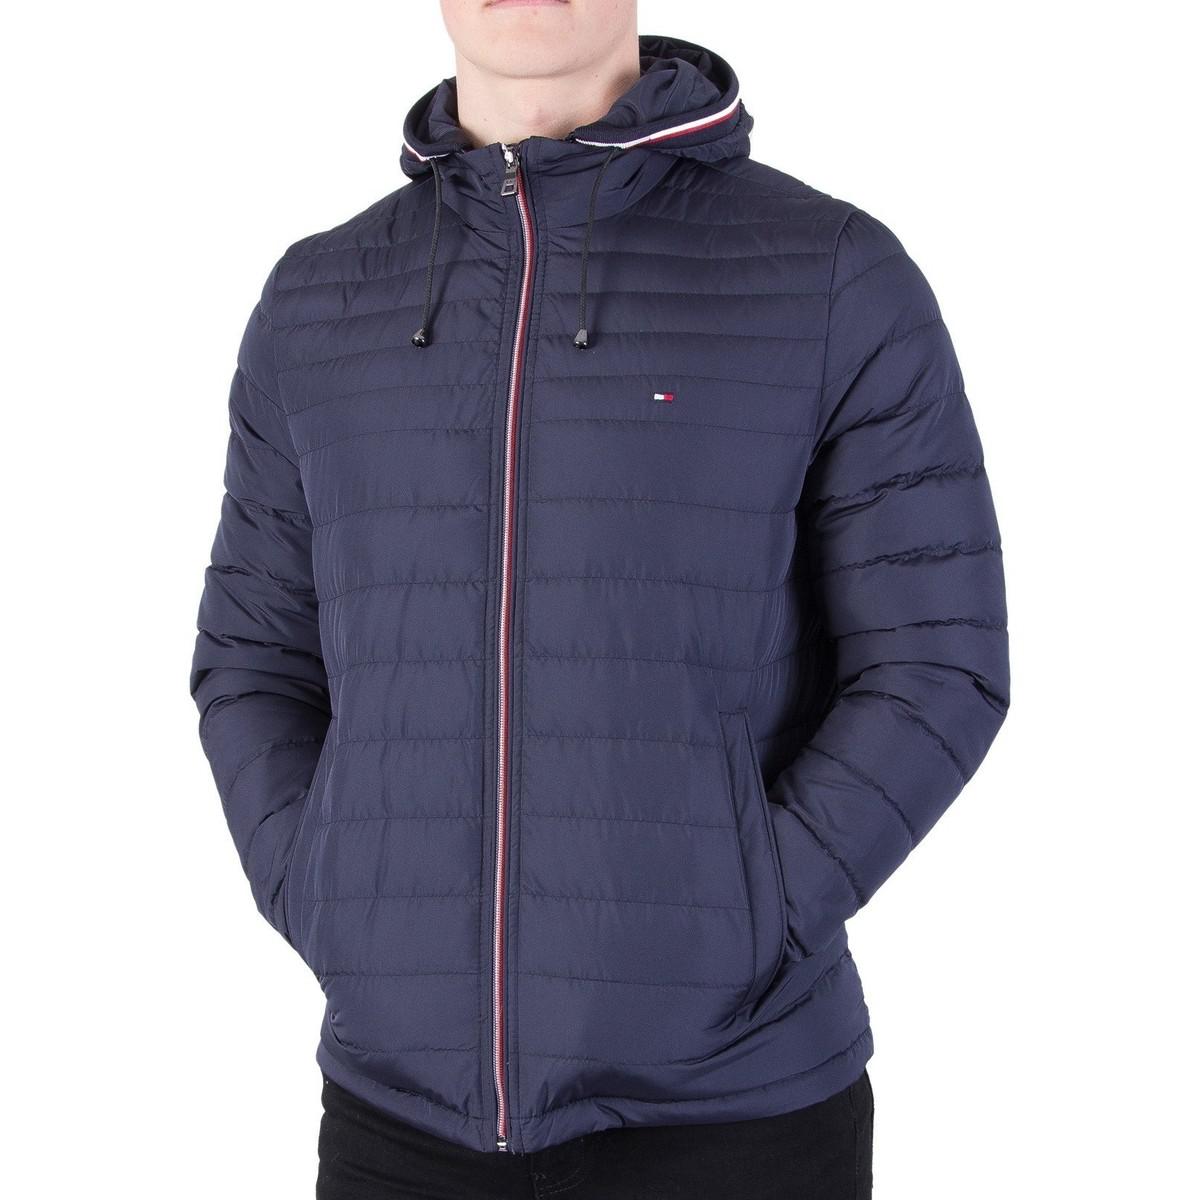 Tommy Hilfiger Lathan Hooded Down Jacket Factory Sale, SAVE 51%.